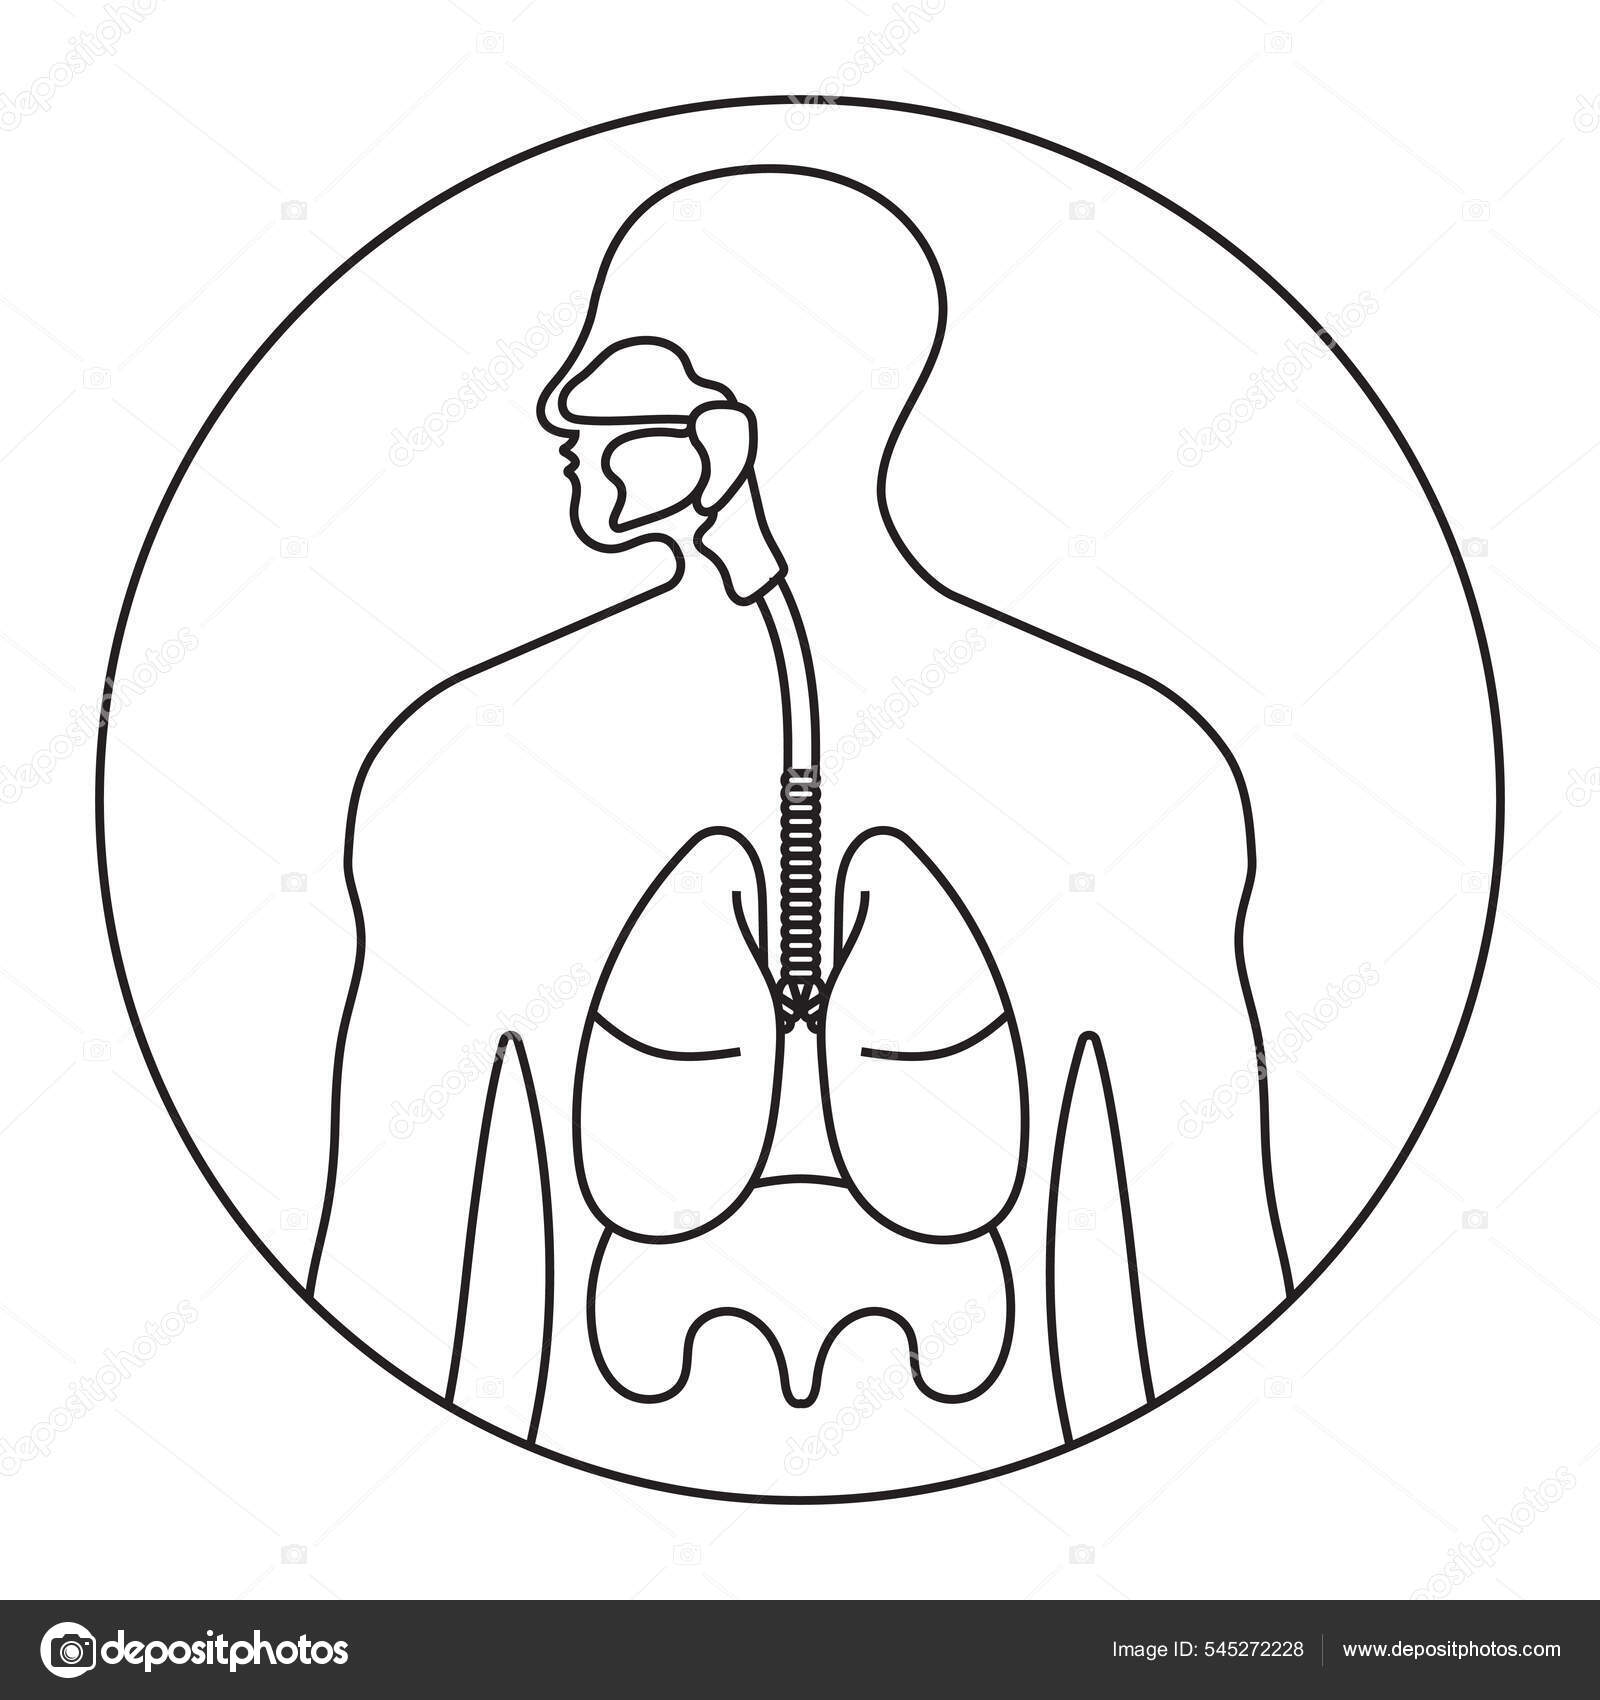 Human Lungs Pulmonary Infection Internal Organ. Respiratory System Inside  Body Silhouette Stock Illustration - Illustration of body, connected:  96760506